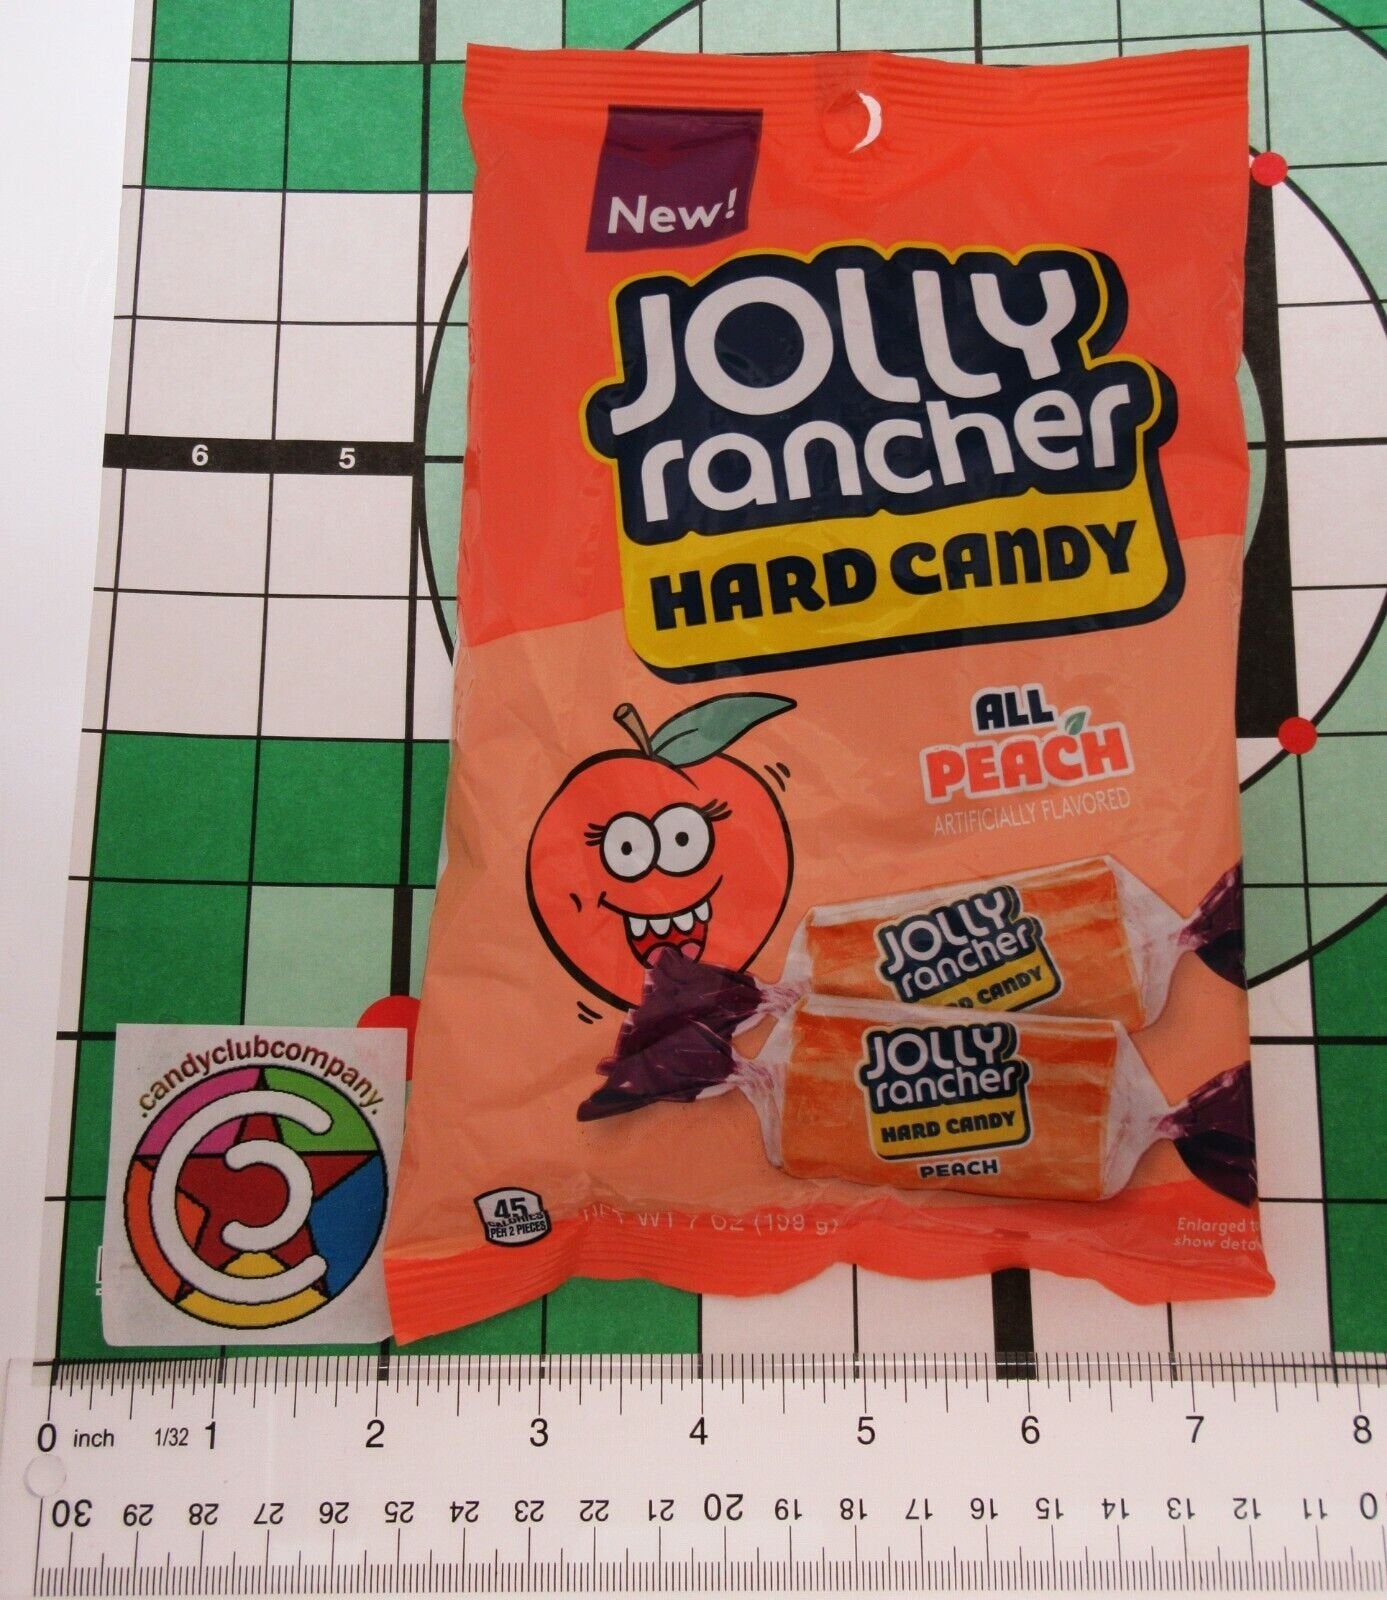 Jolly Rancher PEACH 7oz bag **LIMITED TIME* candy candies